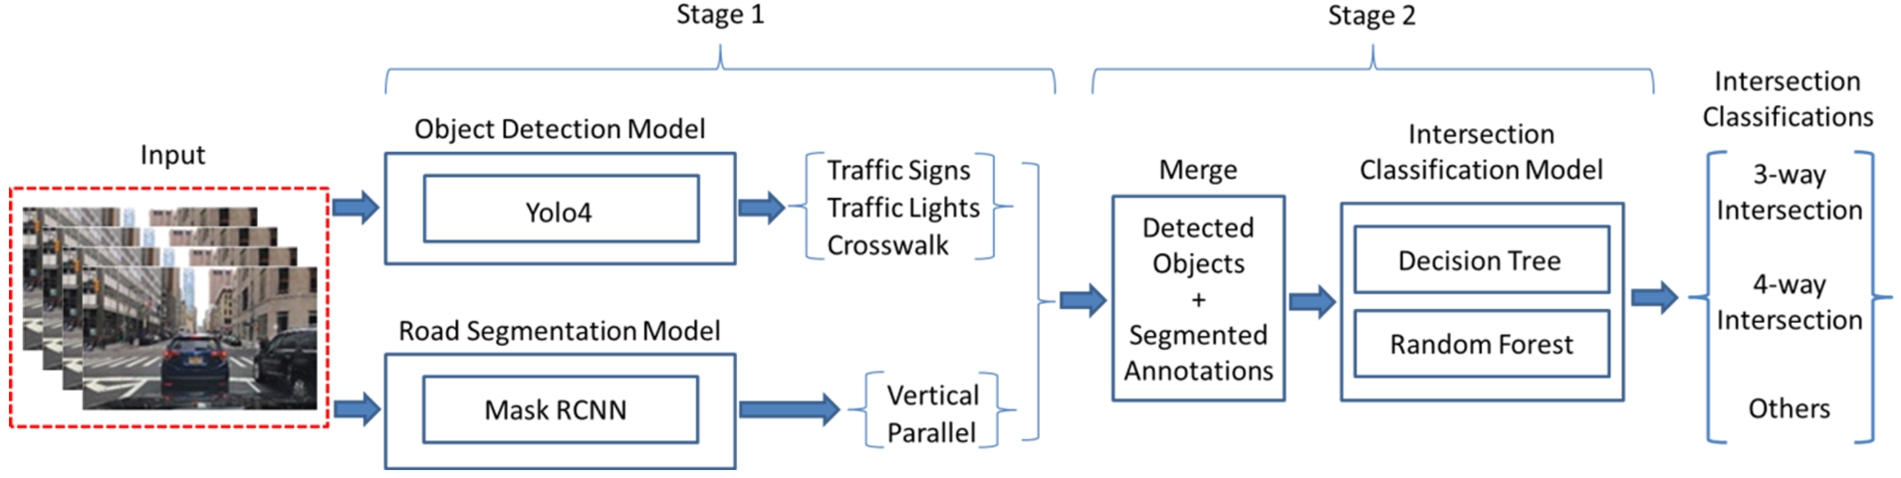 Two-stage intersection classification.